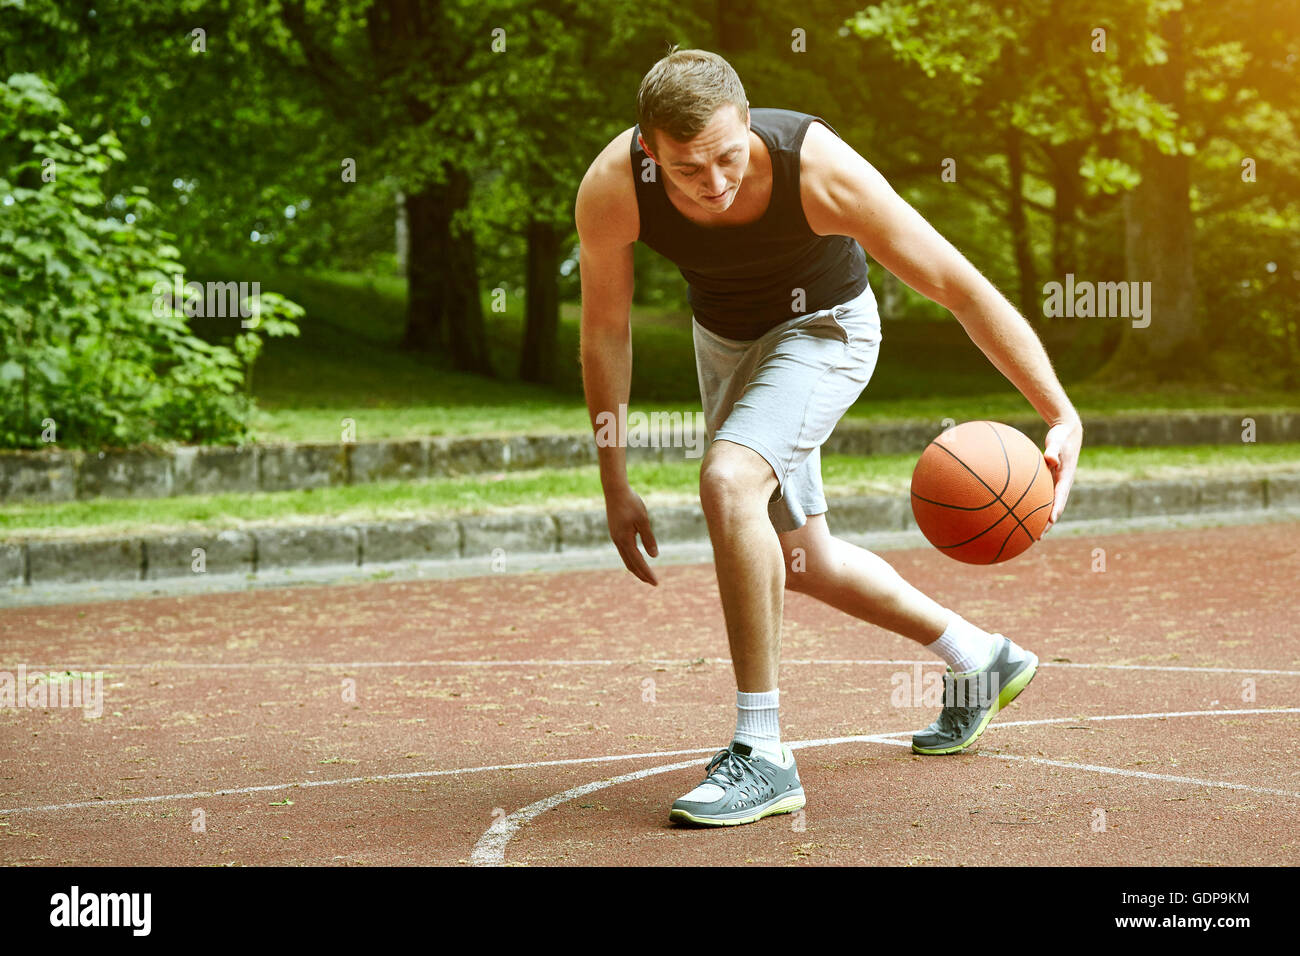 Young male basketball player running with ball on court Stock Photo